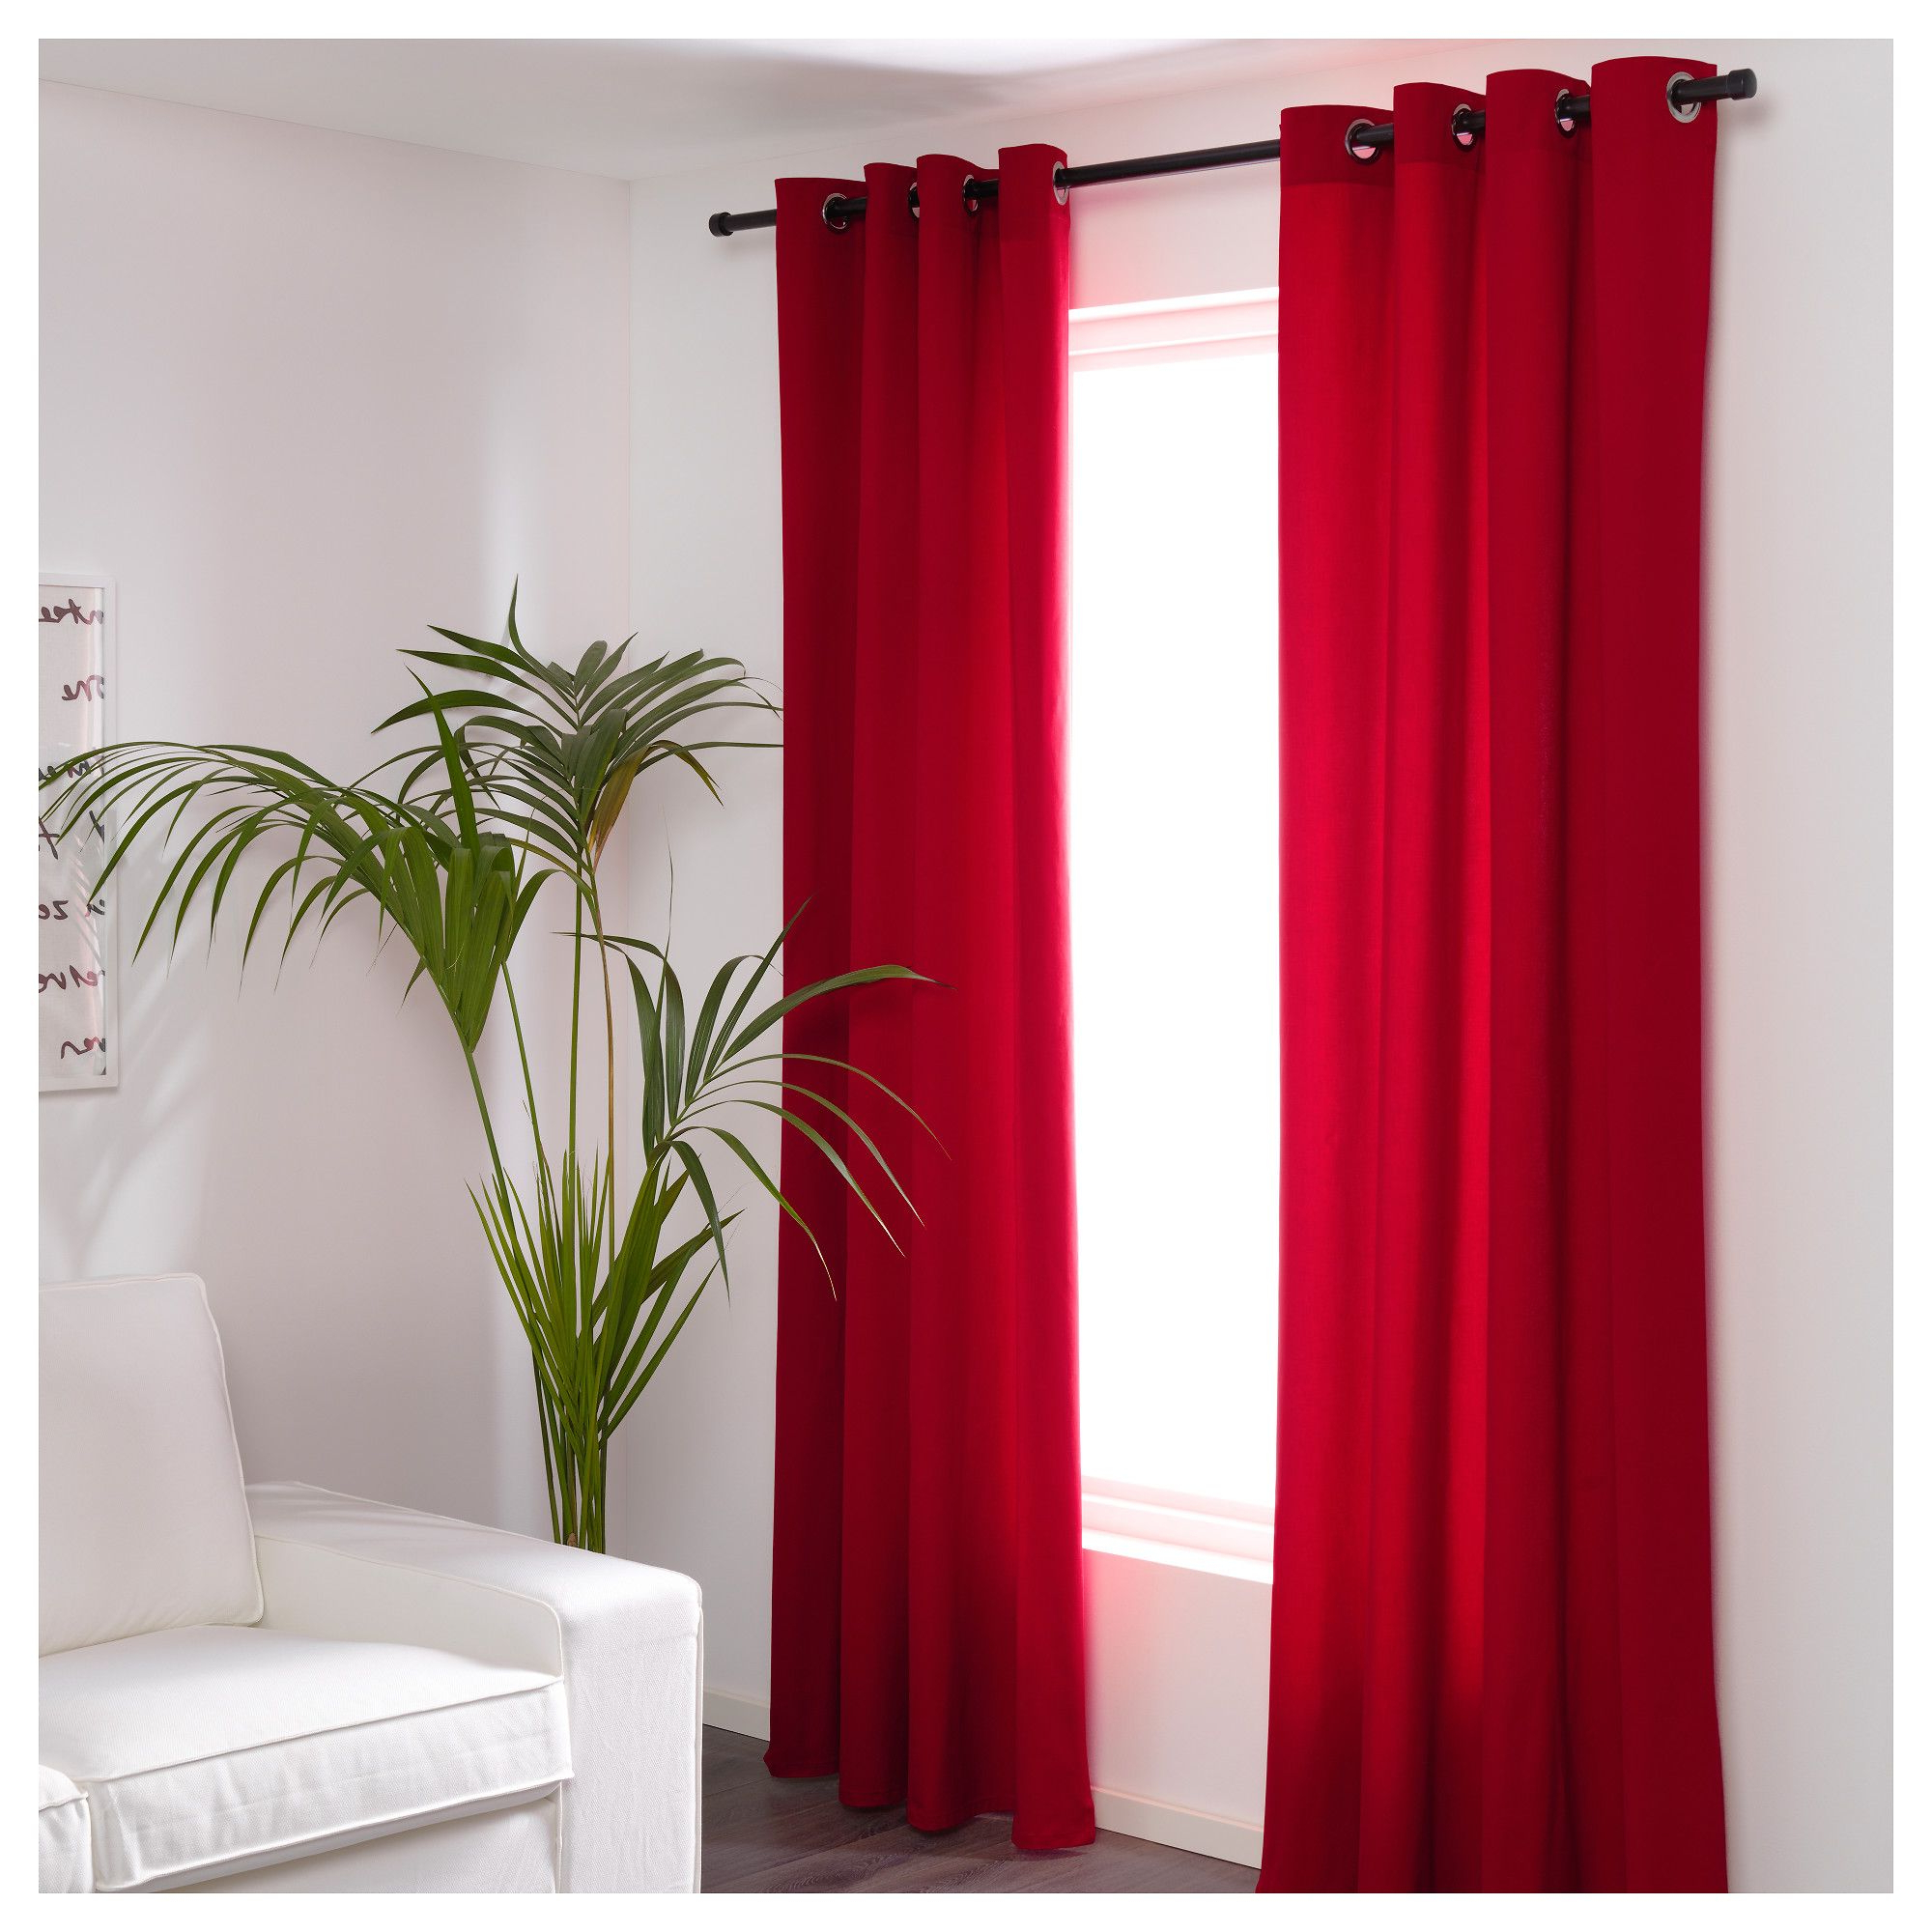 Furniture And Home Furnishings Red Curtains Ikea Red